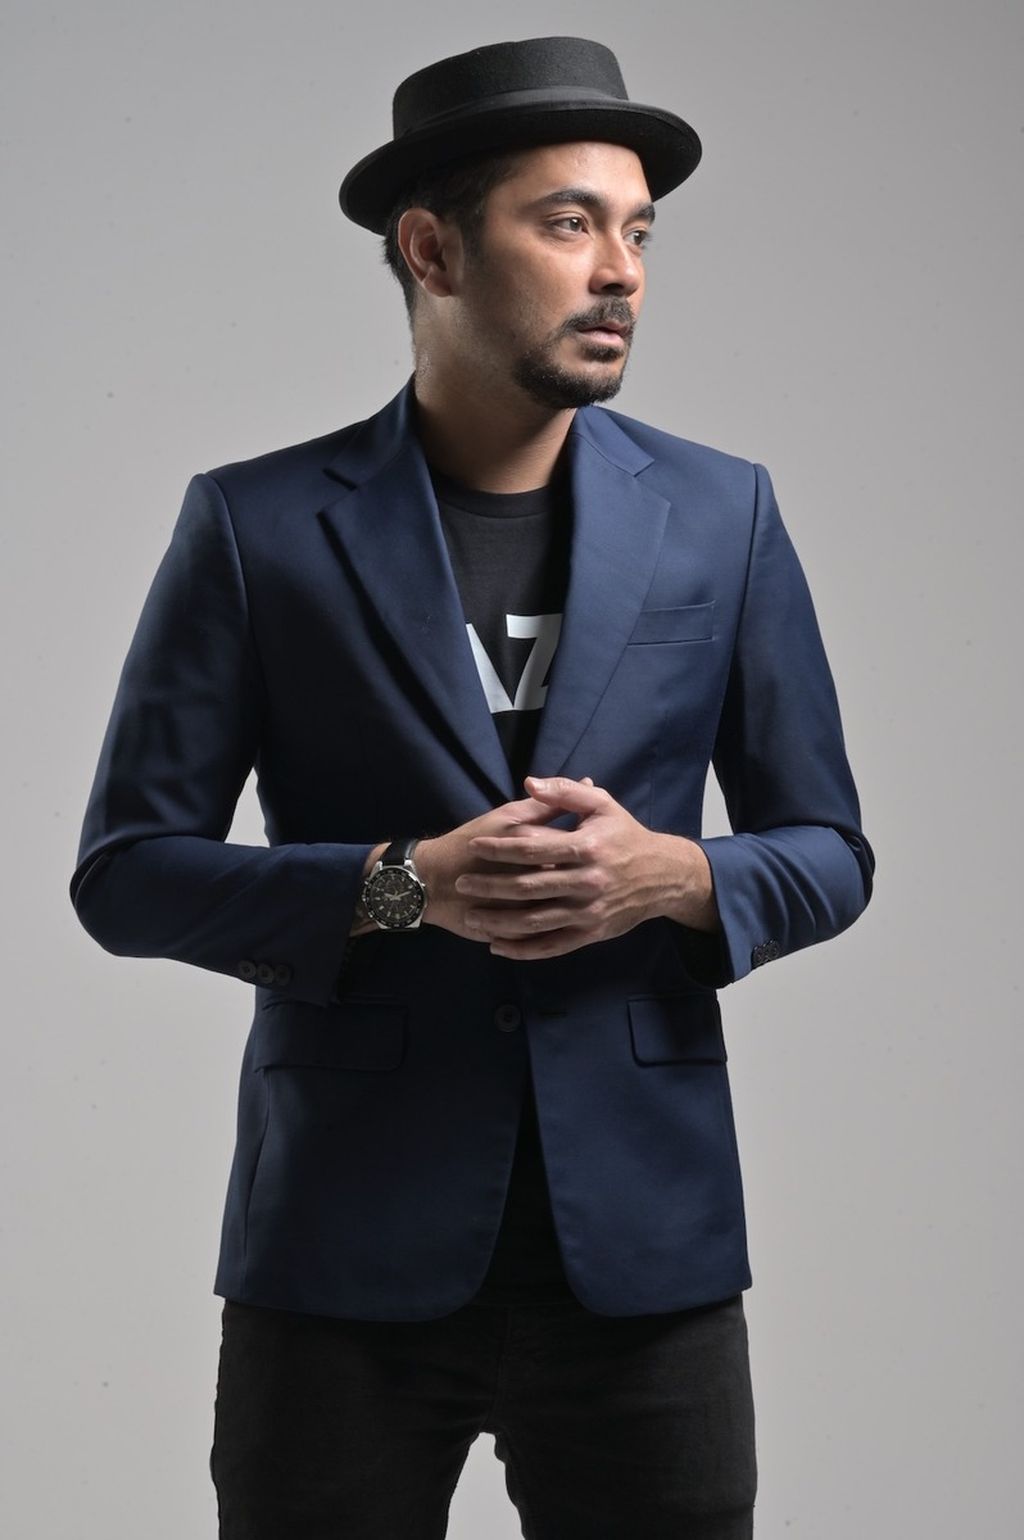 The character of Glenn Fredly is played by Marthino Lio in the film<i>Glenn Fredly The Movie</i>.